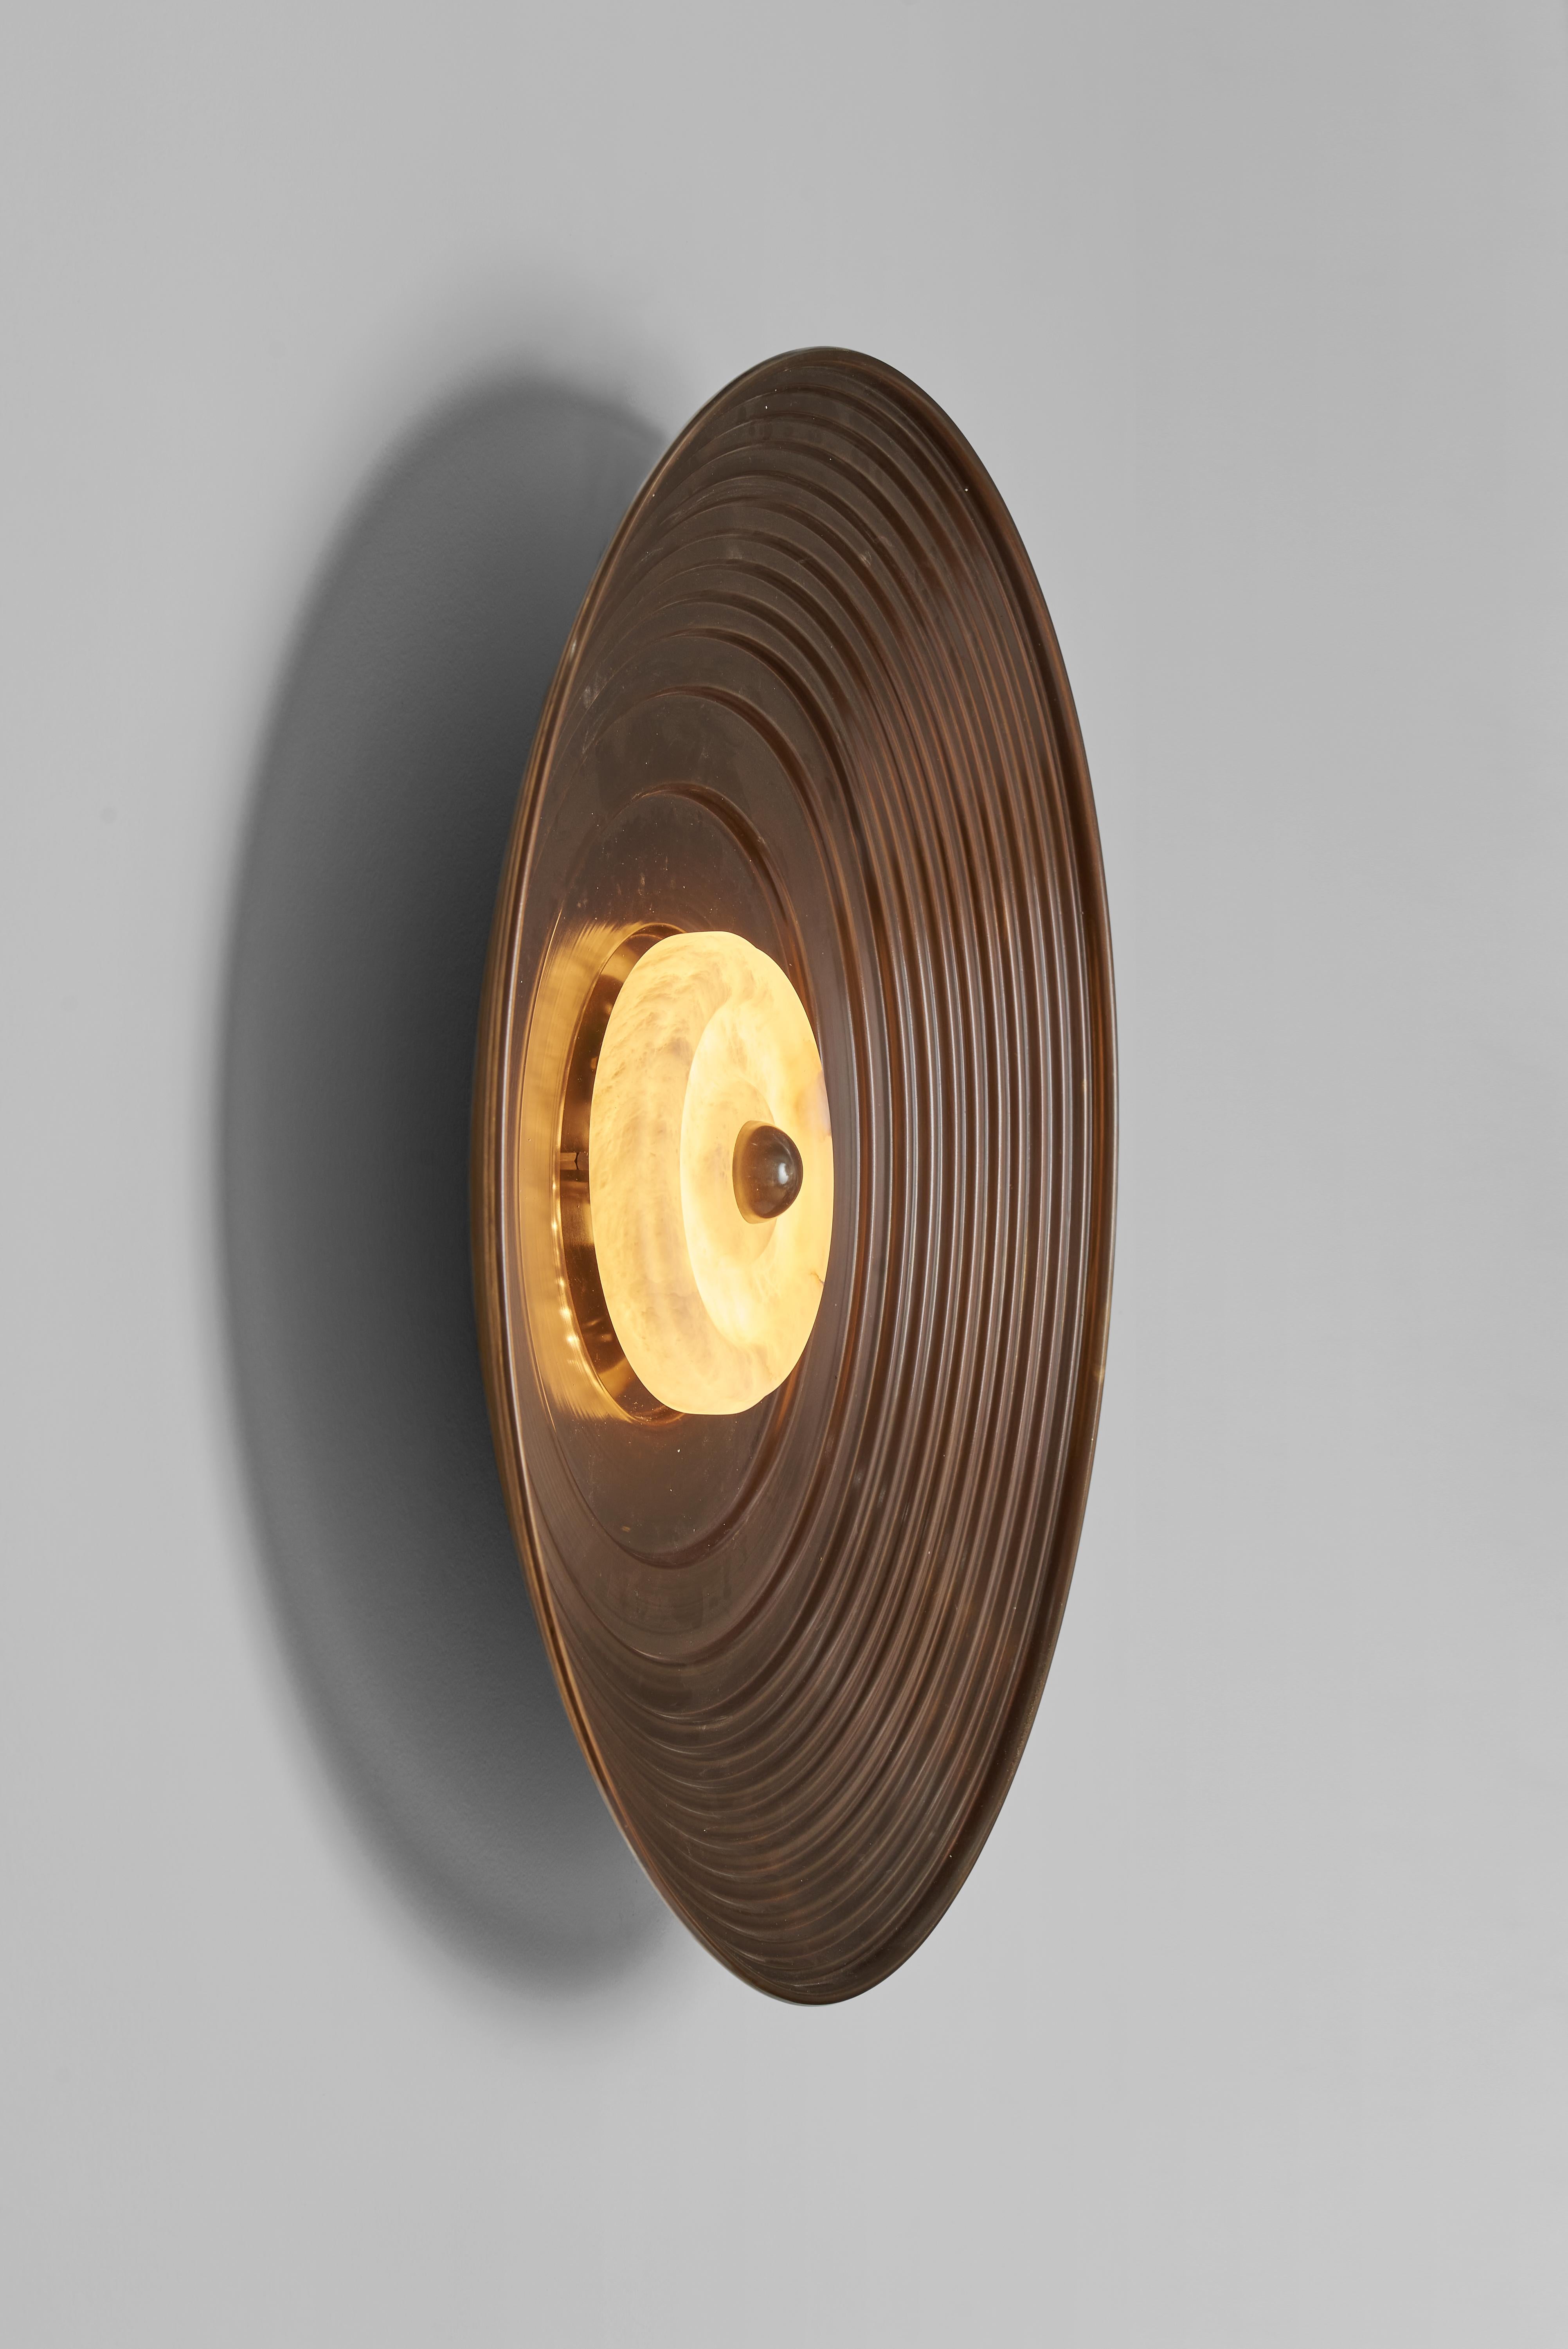 A wall sconce created in collaboration with the milanese interior design studio LC Atelier.
This lighting fixture features a concave disc made from burnished brass sheet that has been turned by hand. The disc is characterized by concentric circles